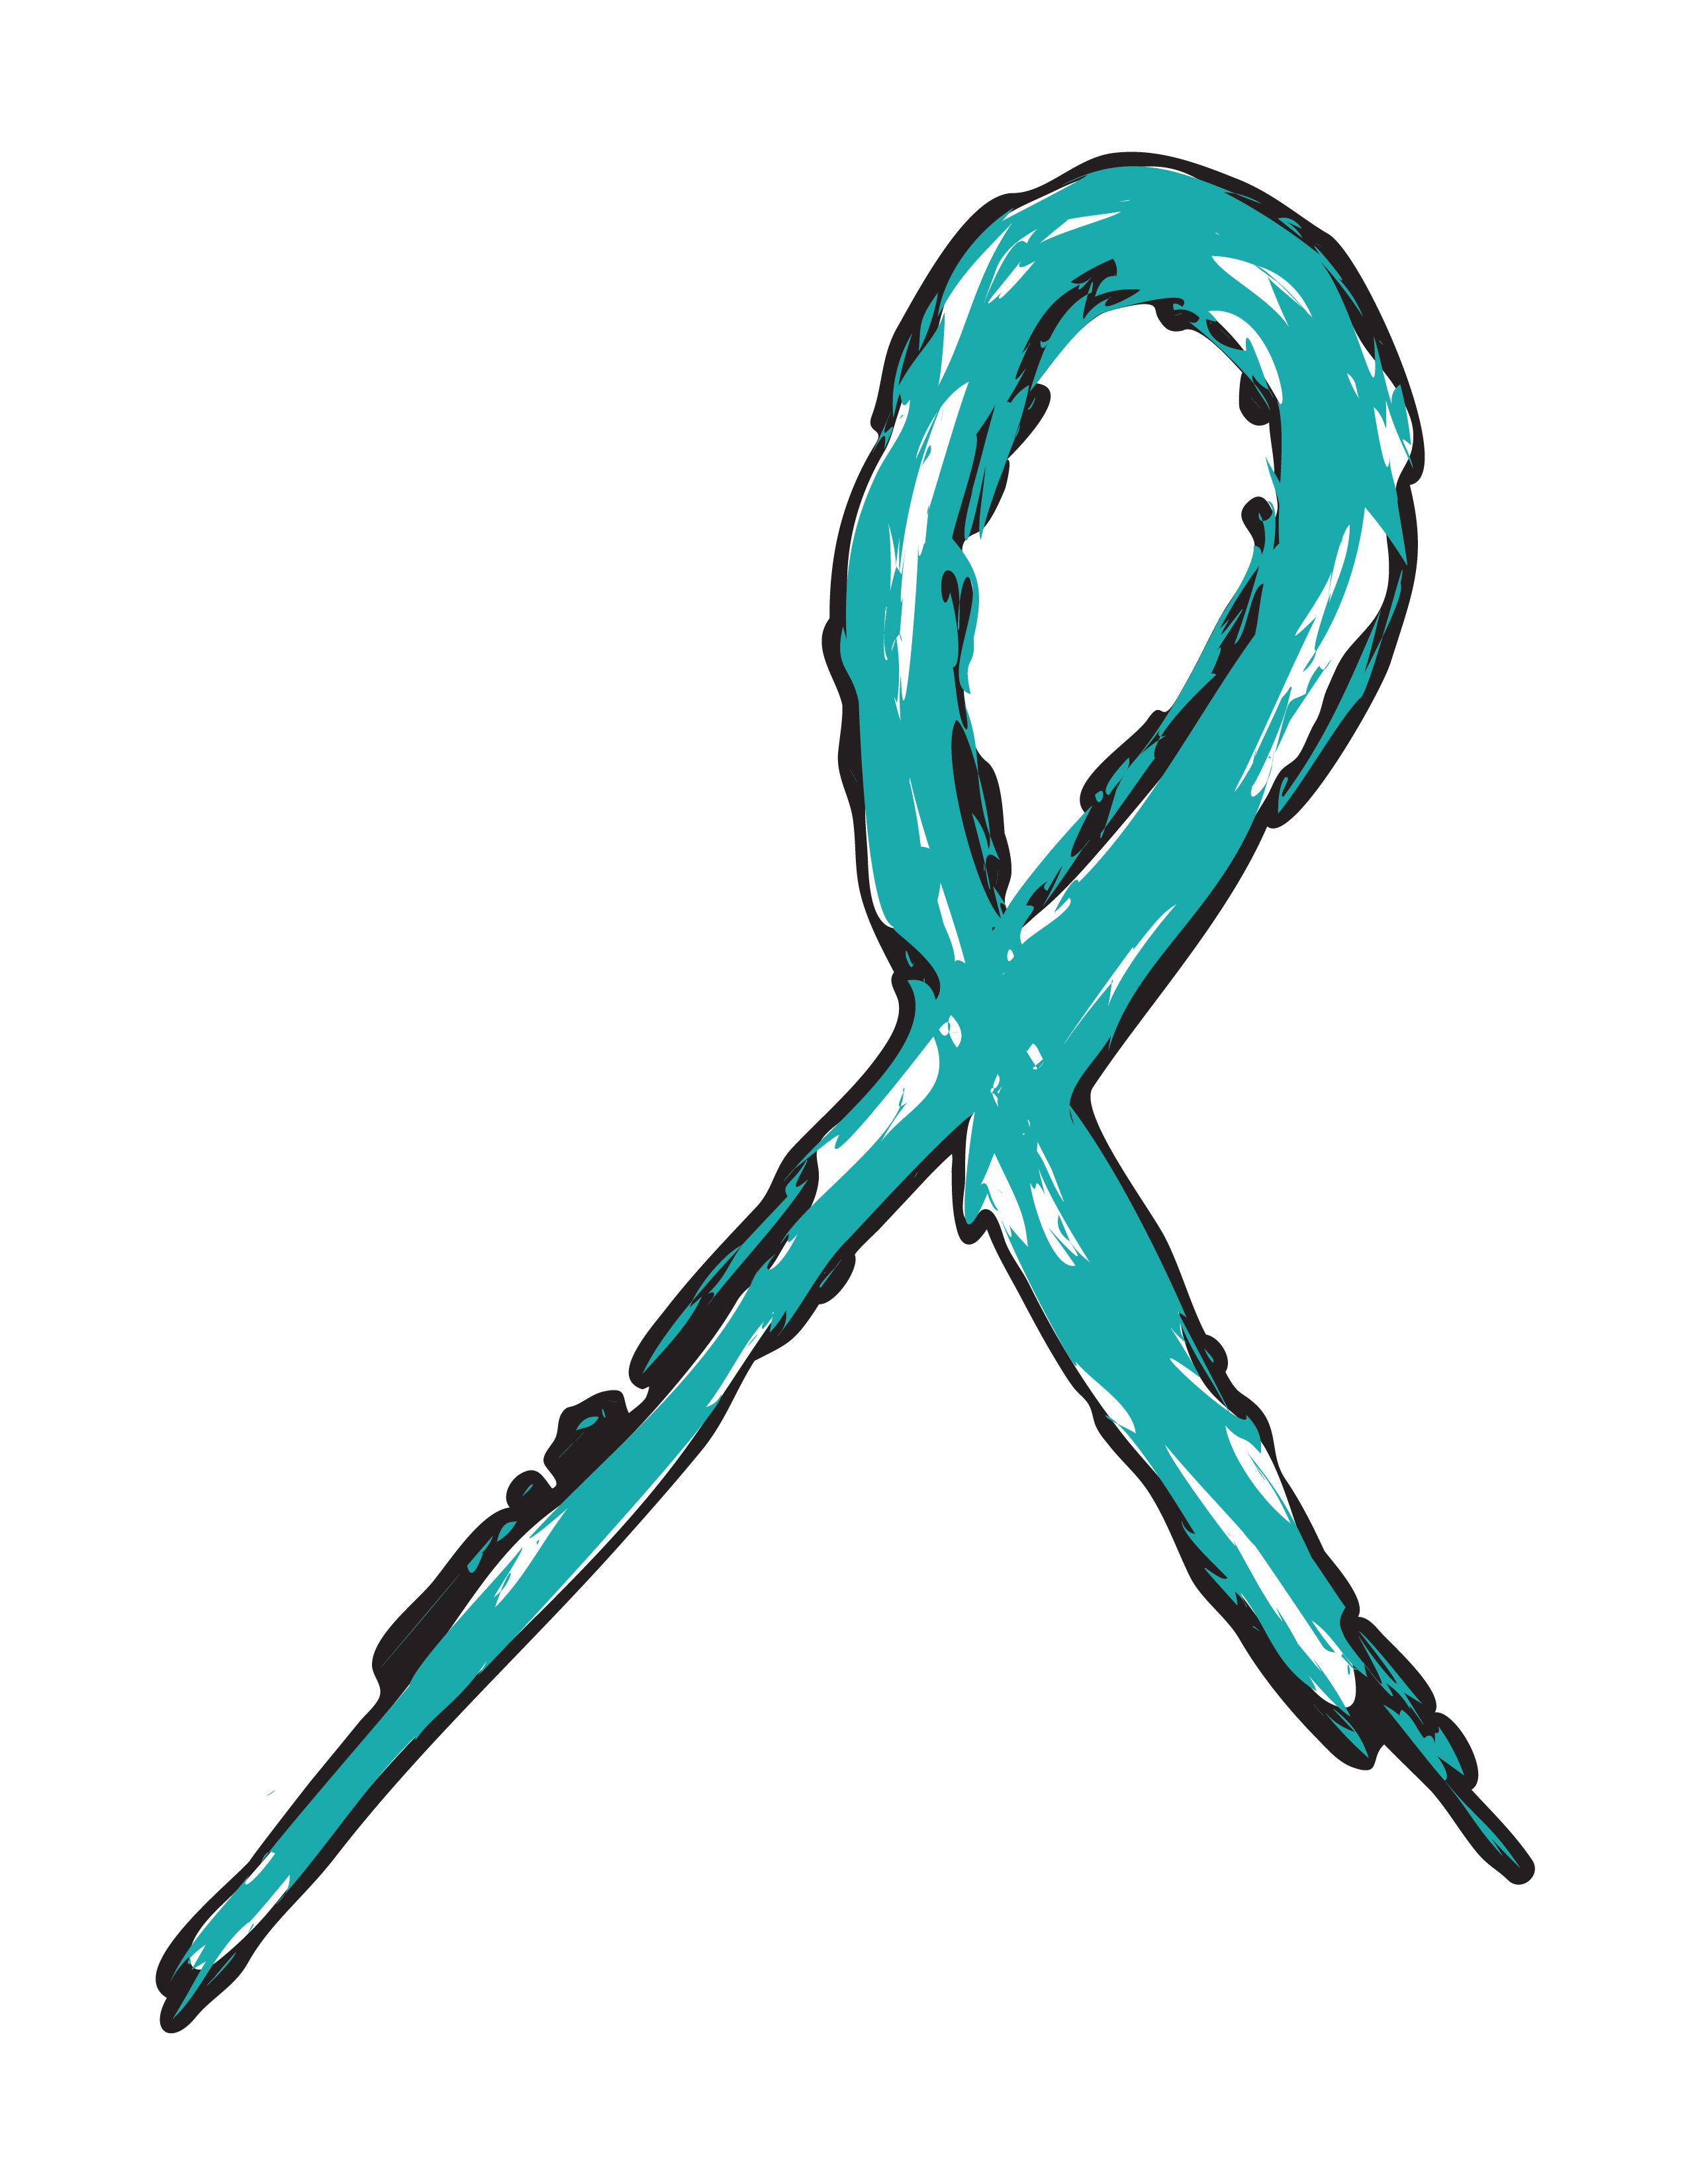 Ovarian Cancer Awareness Month – All About The Cancer That ...